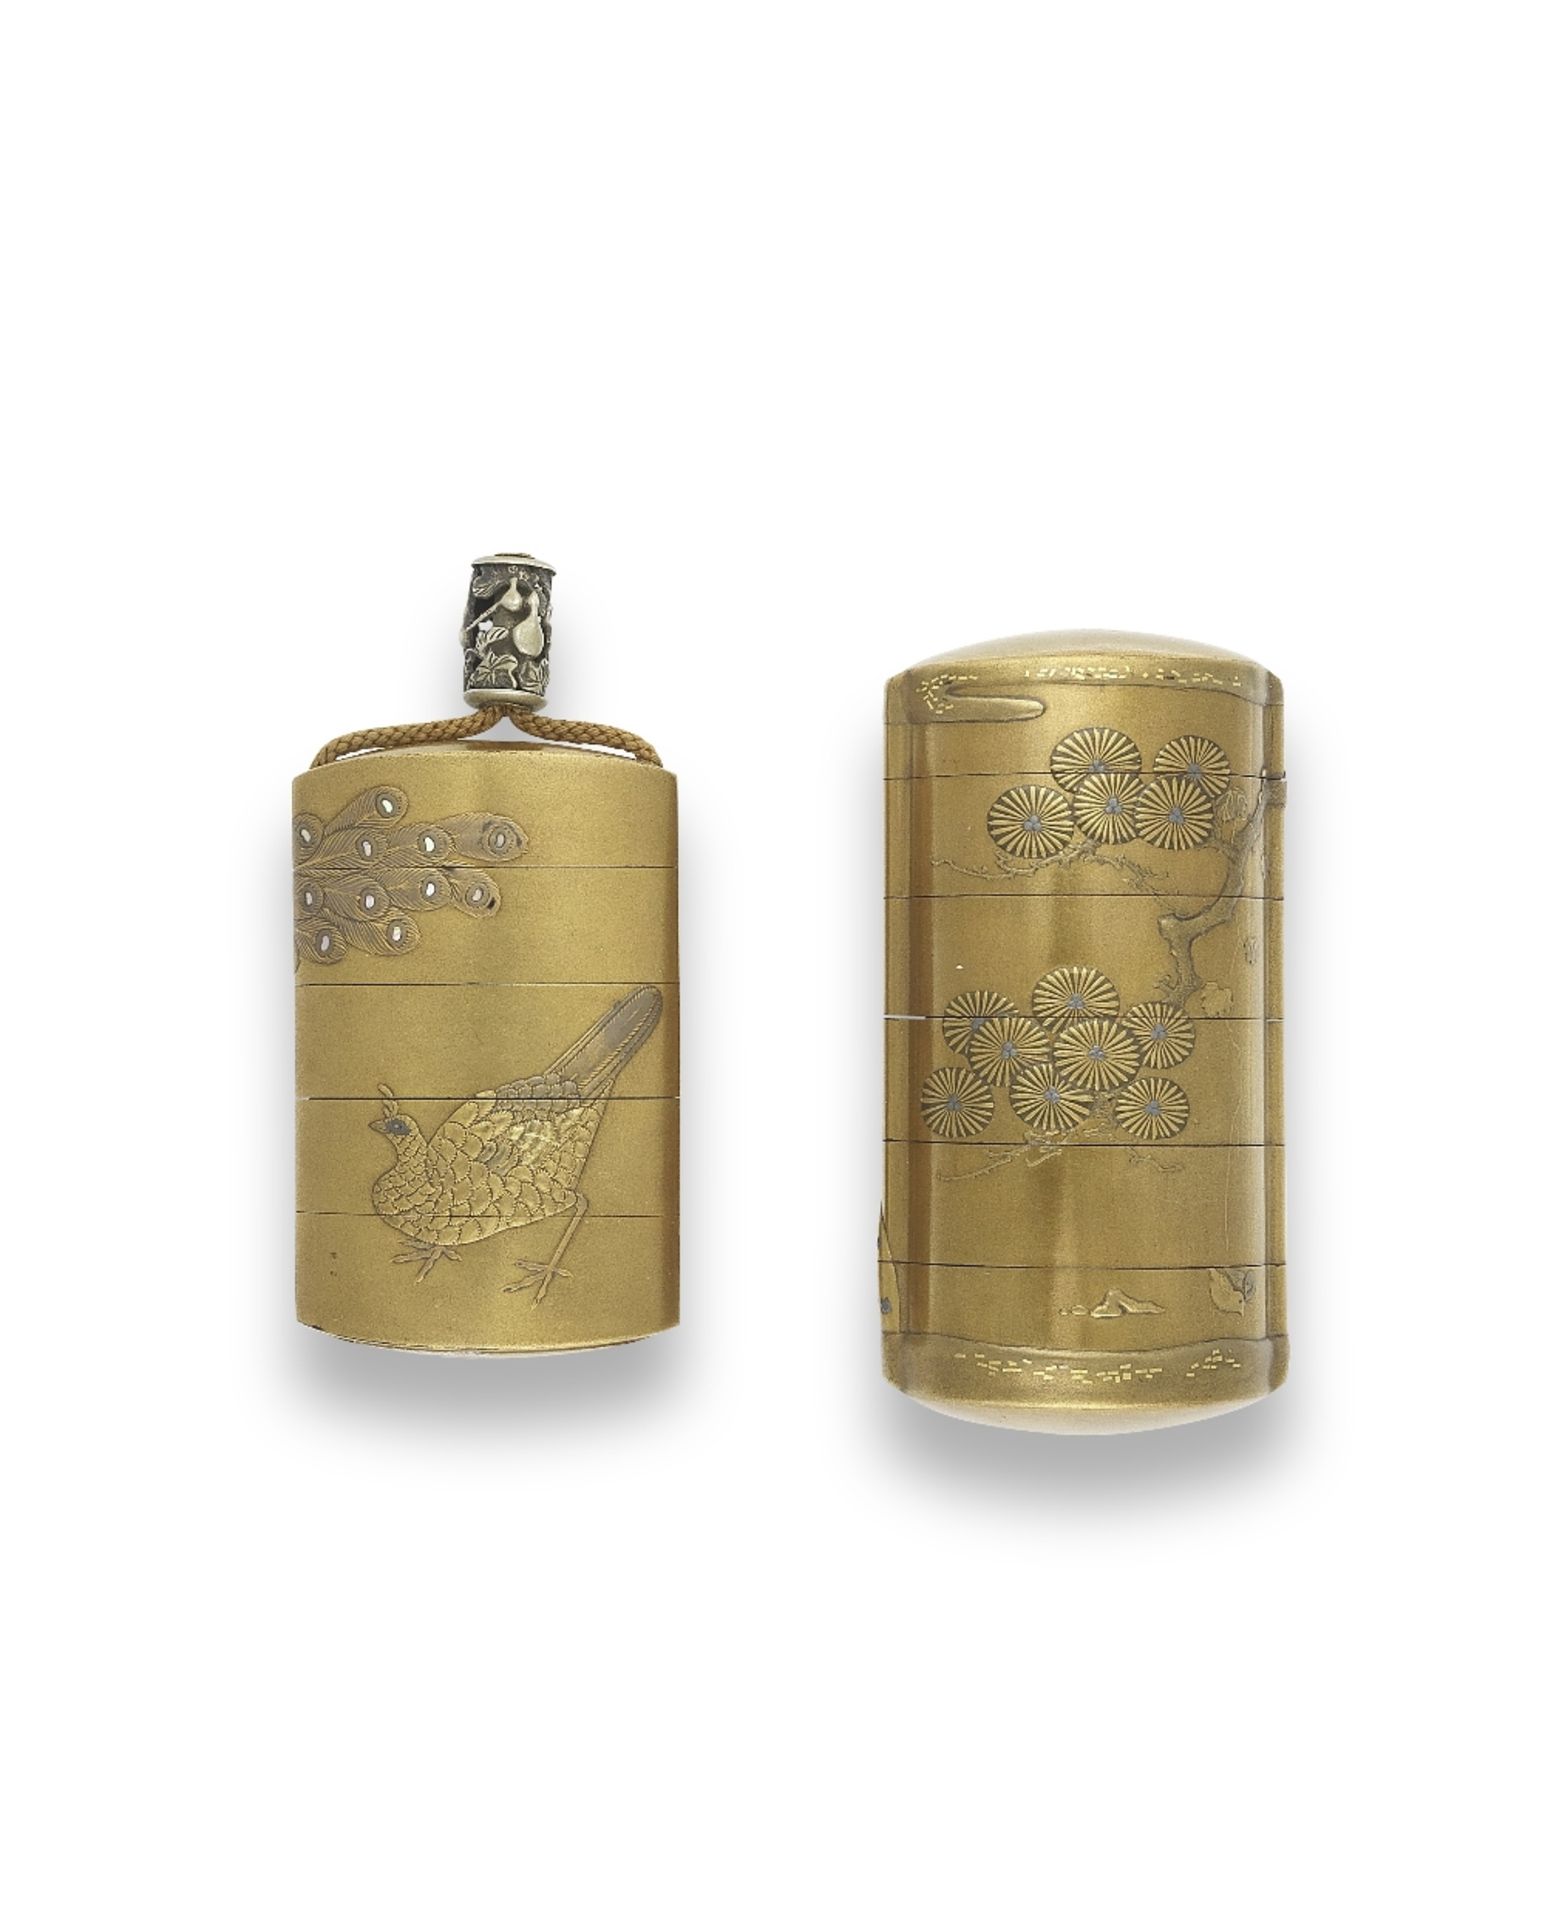 TWO GOLD-LACQUER INRO One by Josen(sai) and one by Hasensai, Edo period (1615-1868), 19th century... - Image 2 of 2